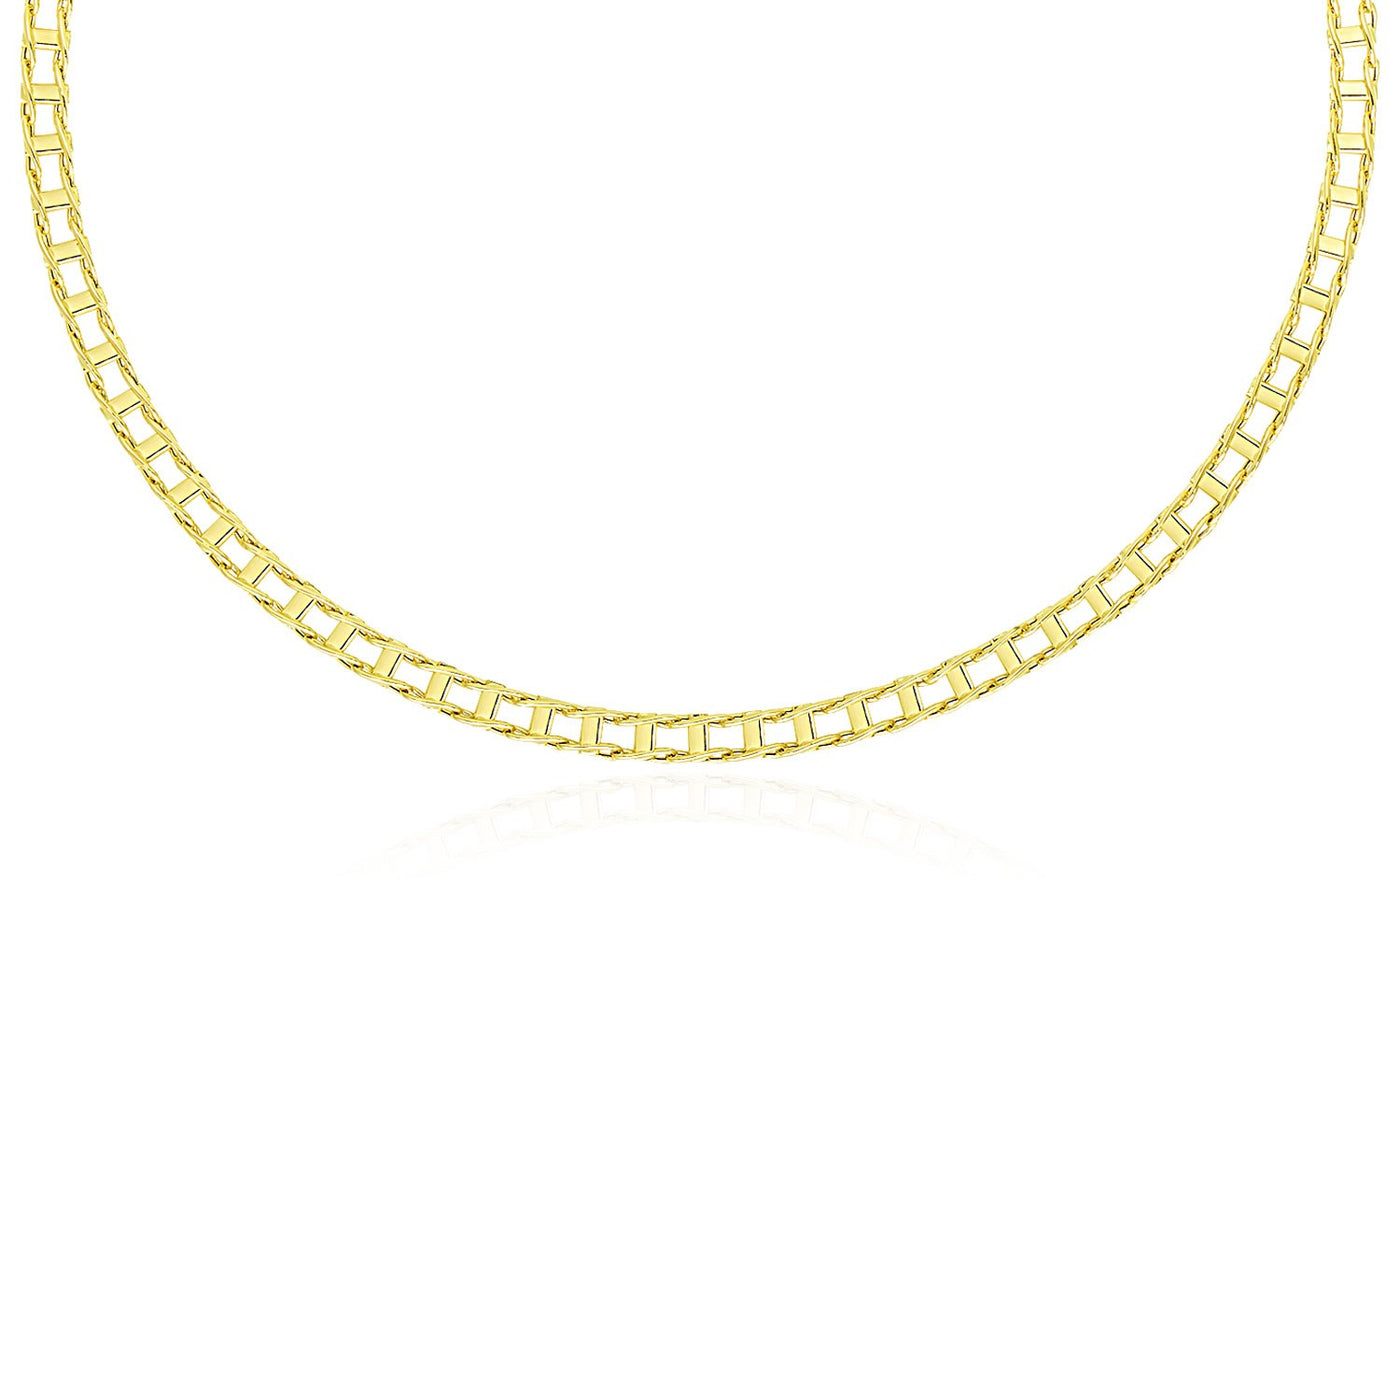 14k Yellow Gold Men's Necklace with Track Design Links